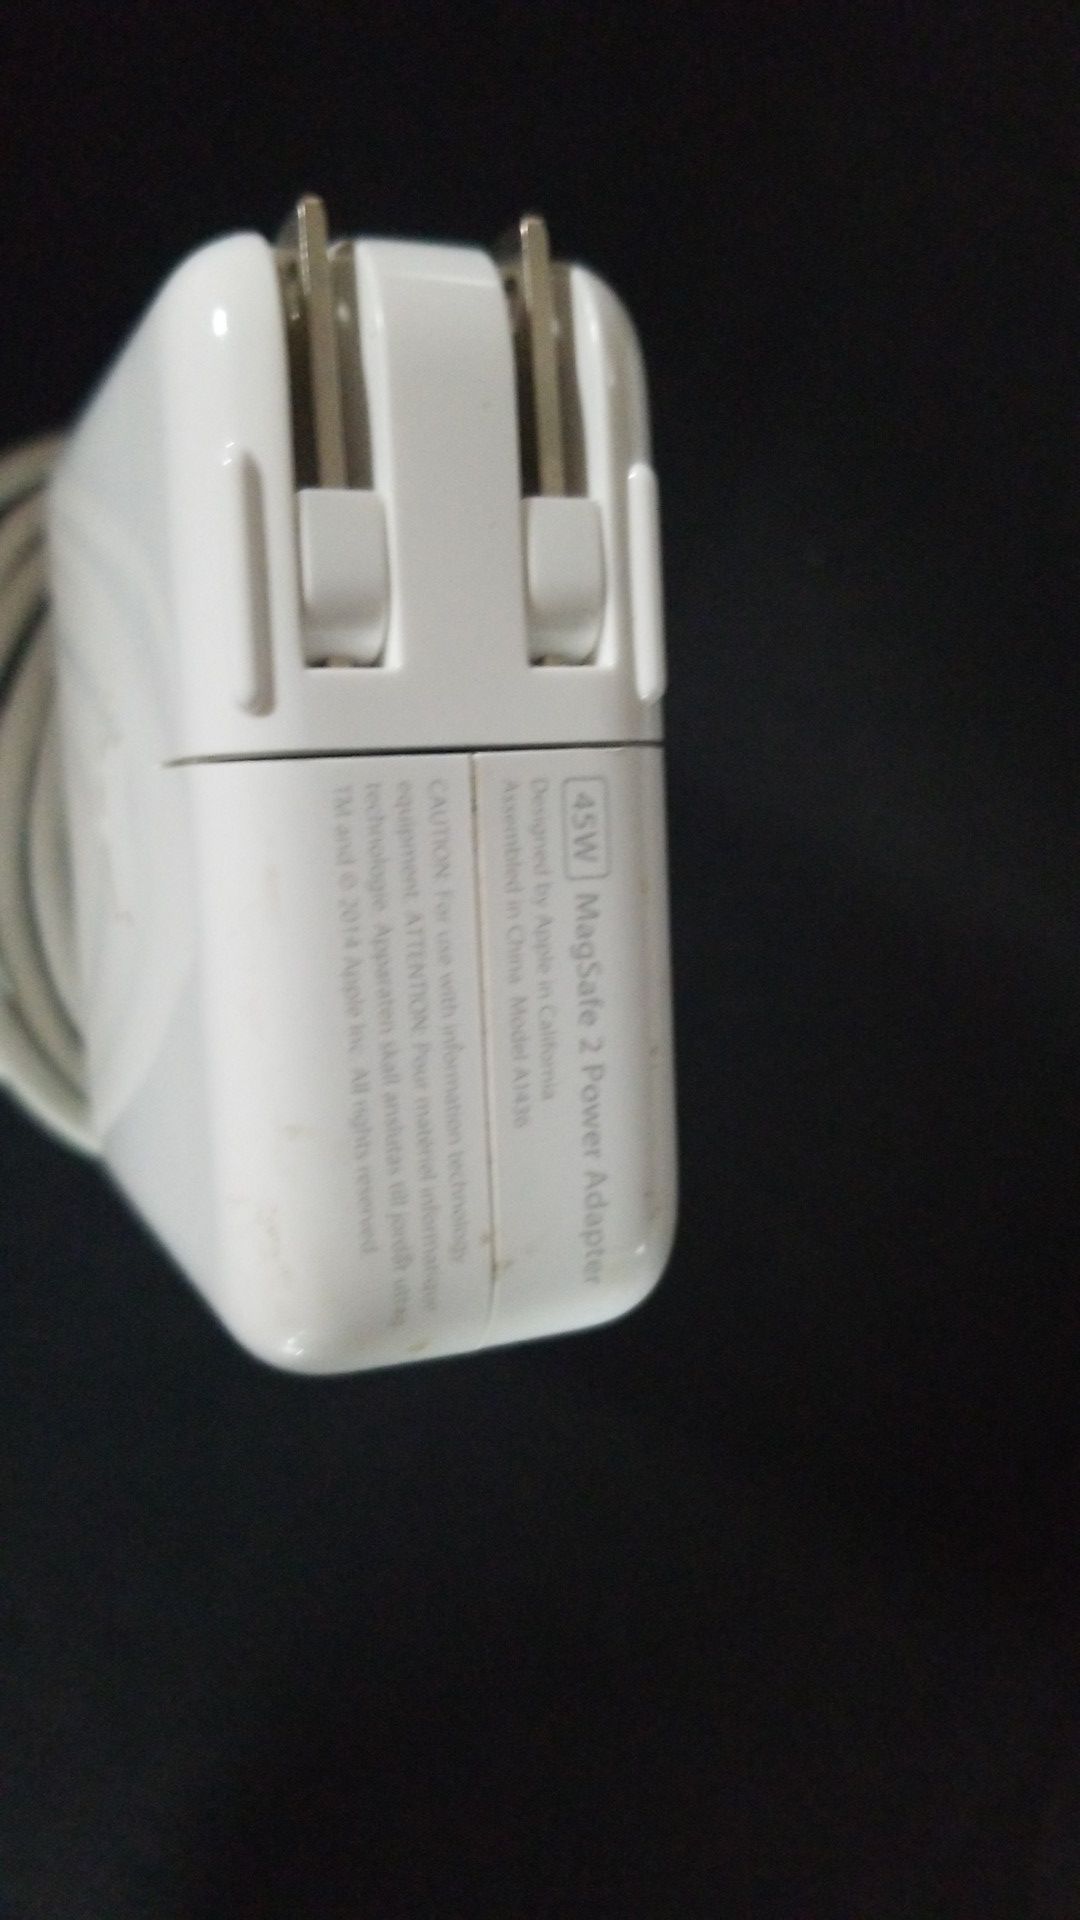 Apple 45w MagSafe 2 Power Adapter 2 of them available